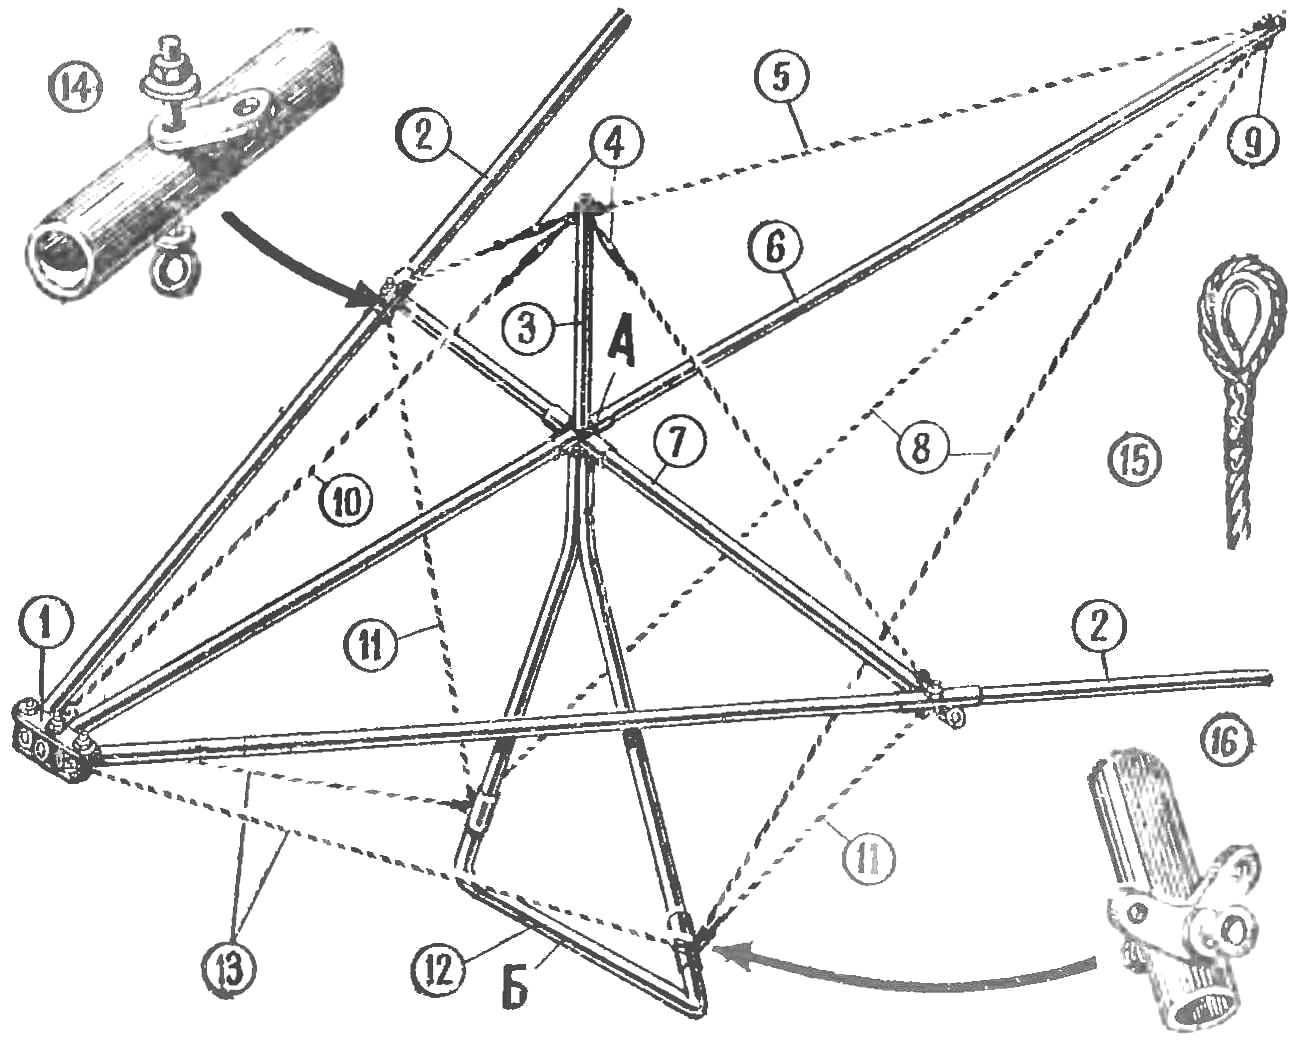 Fig. 4. The design of the frame